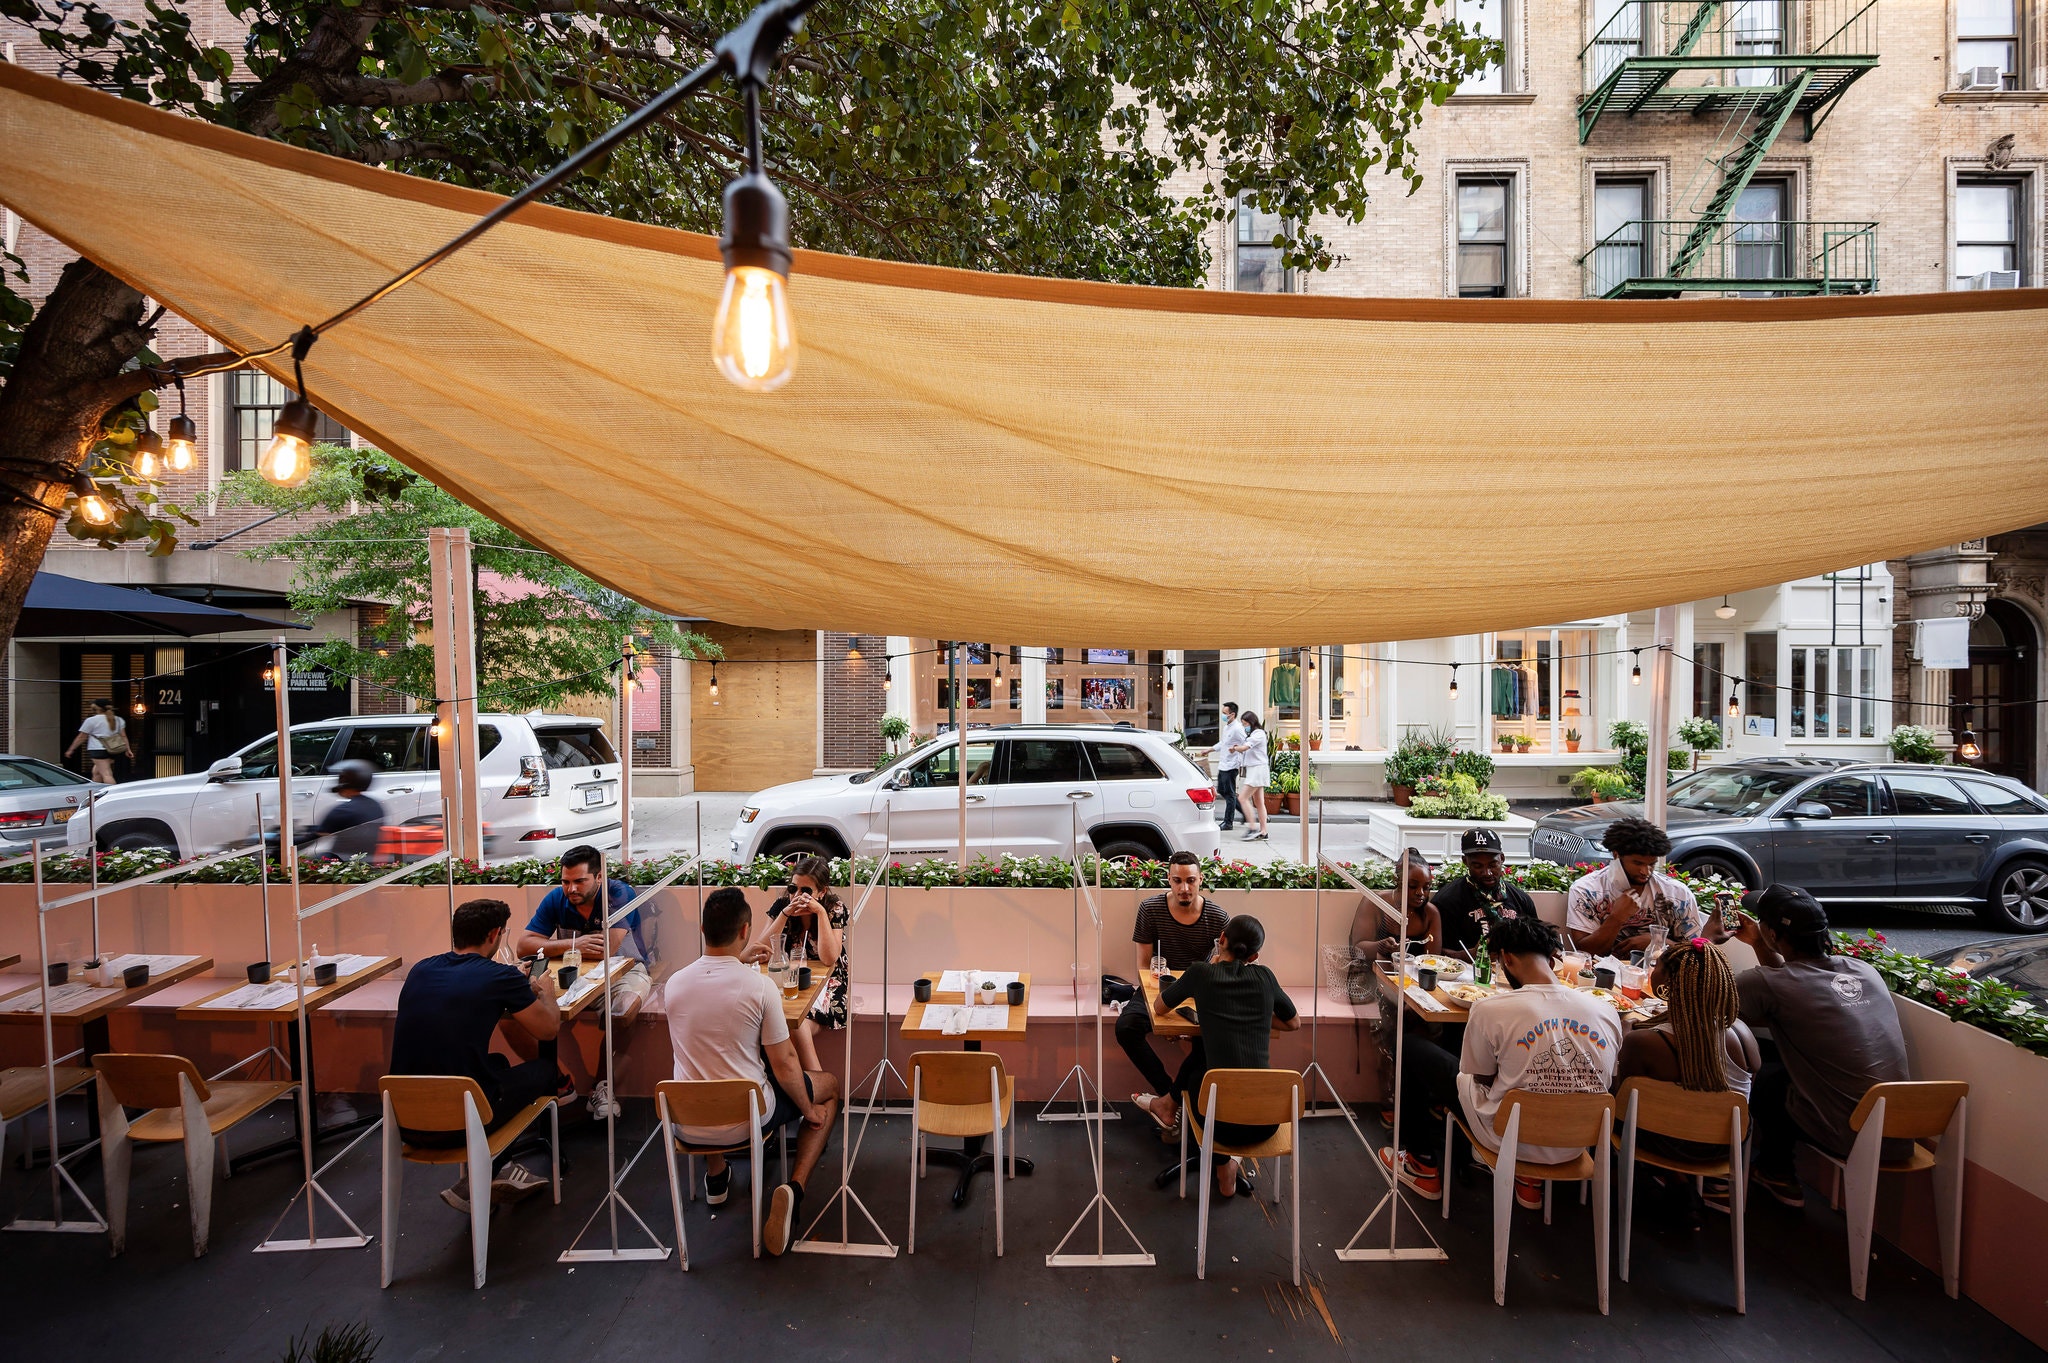 Al Fresco Architecture How New York S Streets Have Been Transformed For Outdoor Dining Architizer Journal